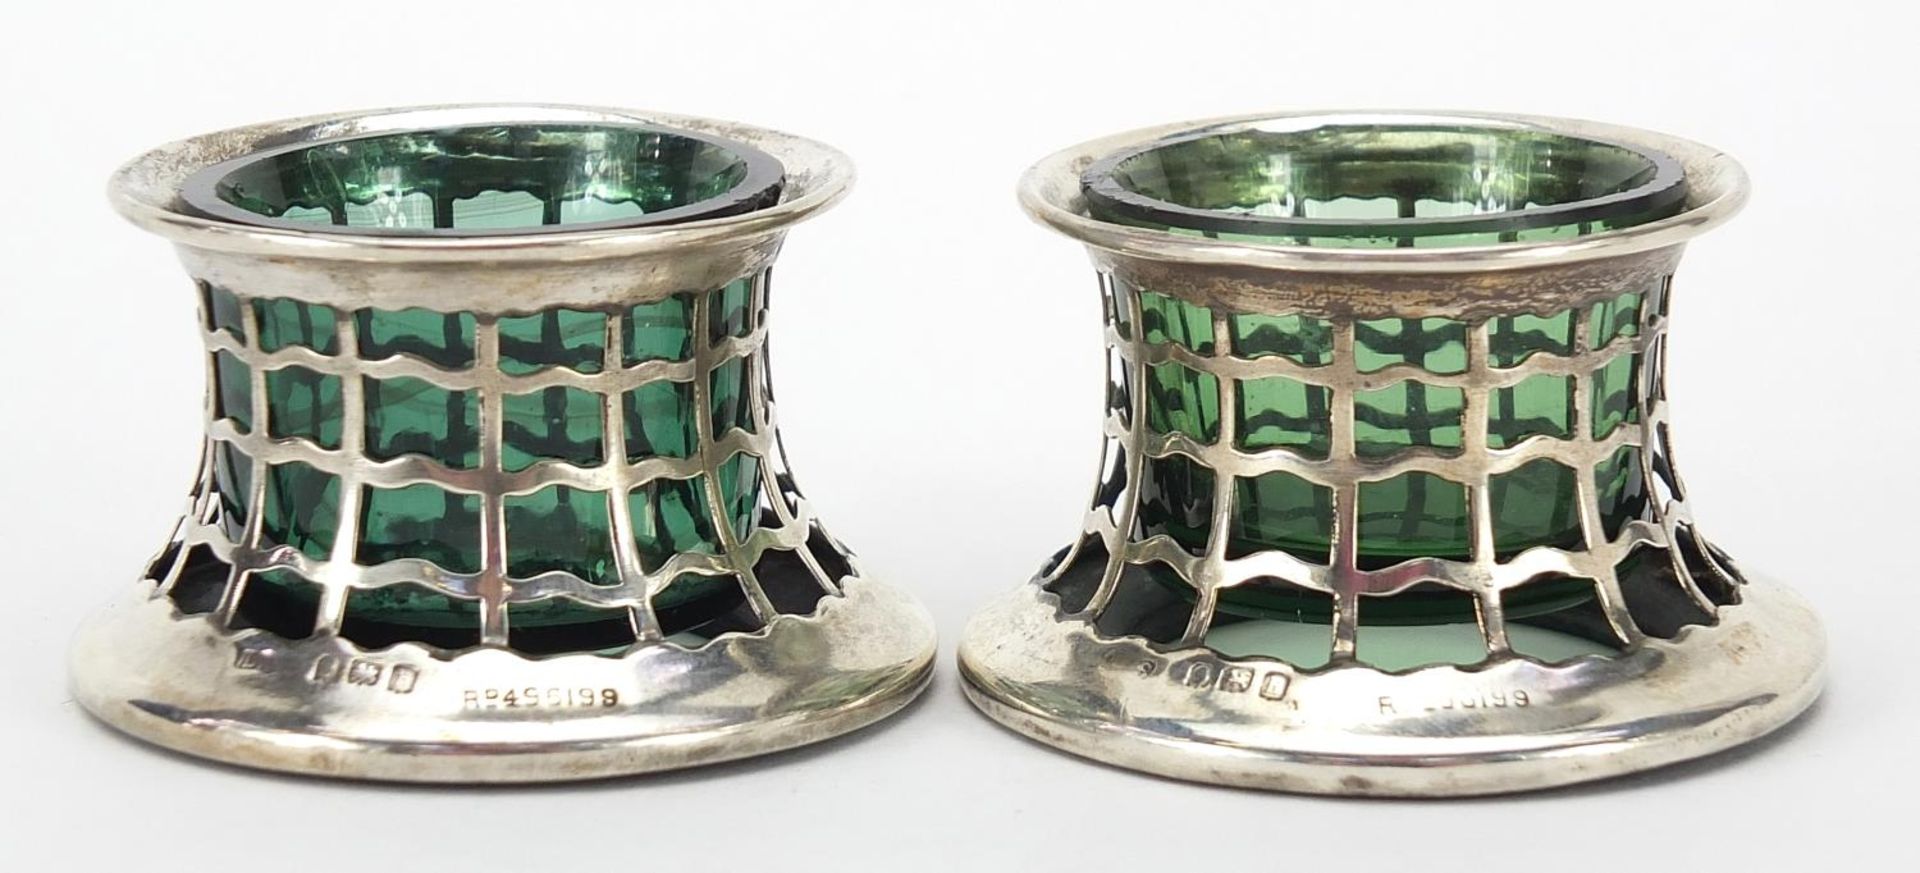 Pair of Edwardian pierced silver open salts with green glass liners, indistinct maker's mark - Image 2 of 4